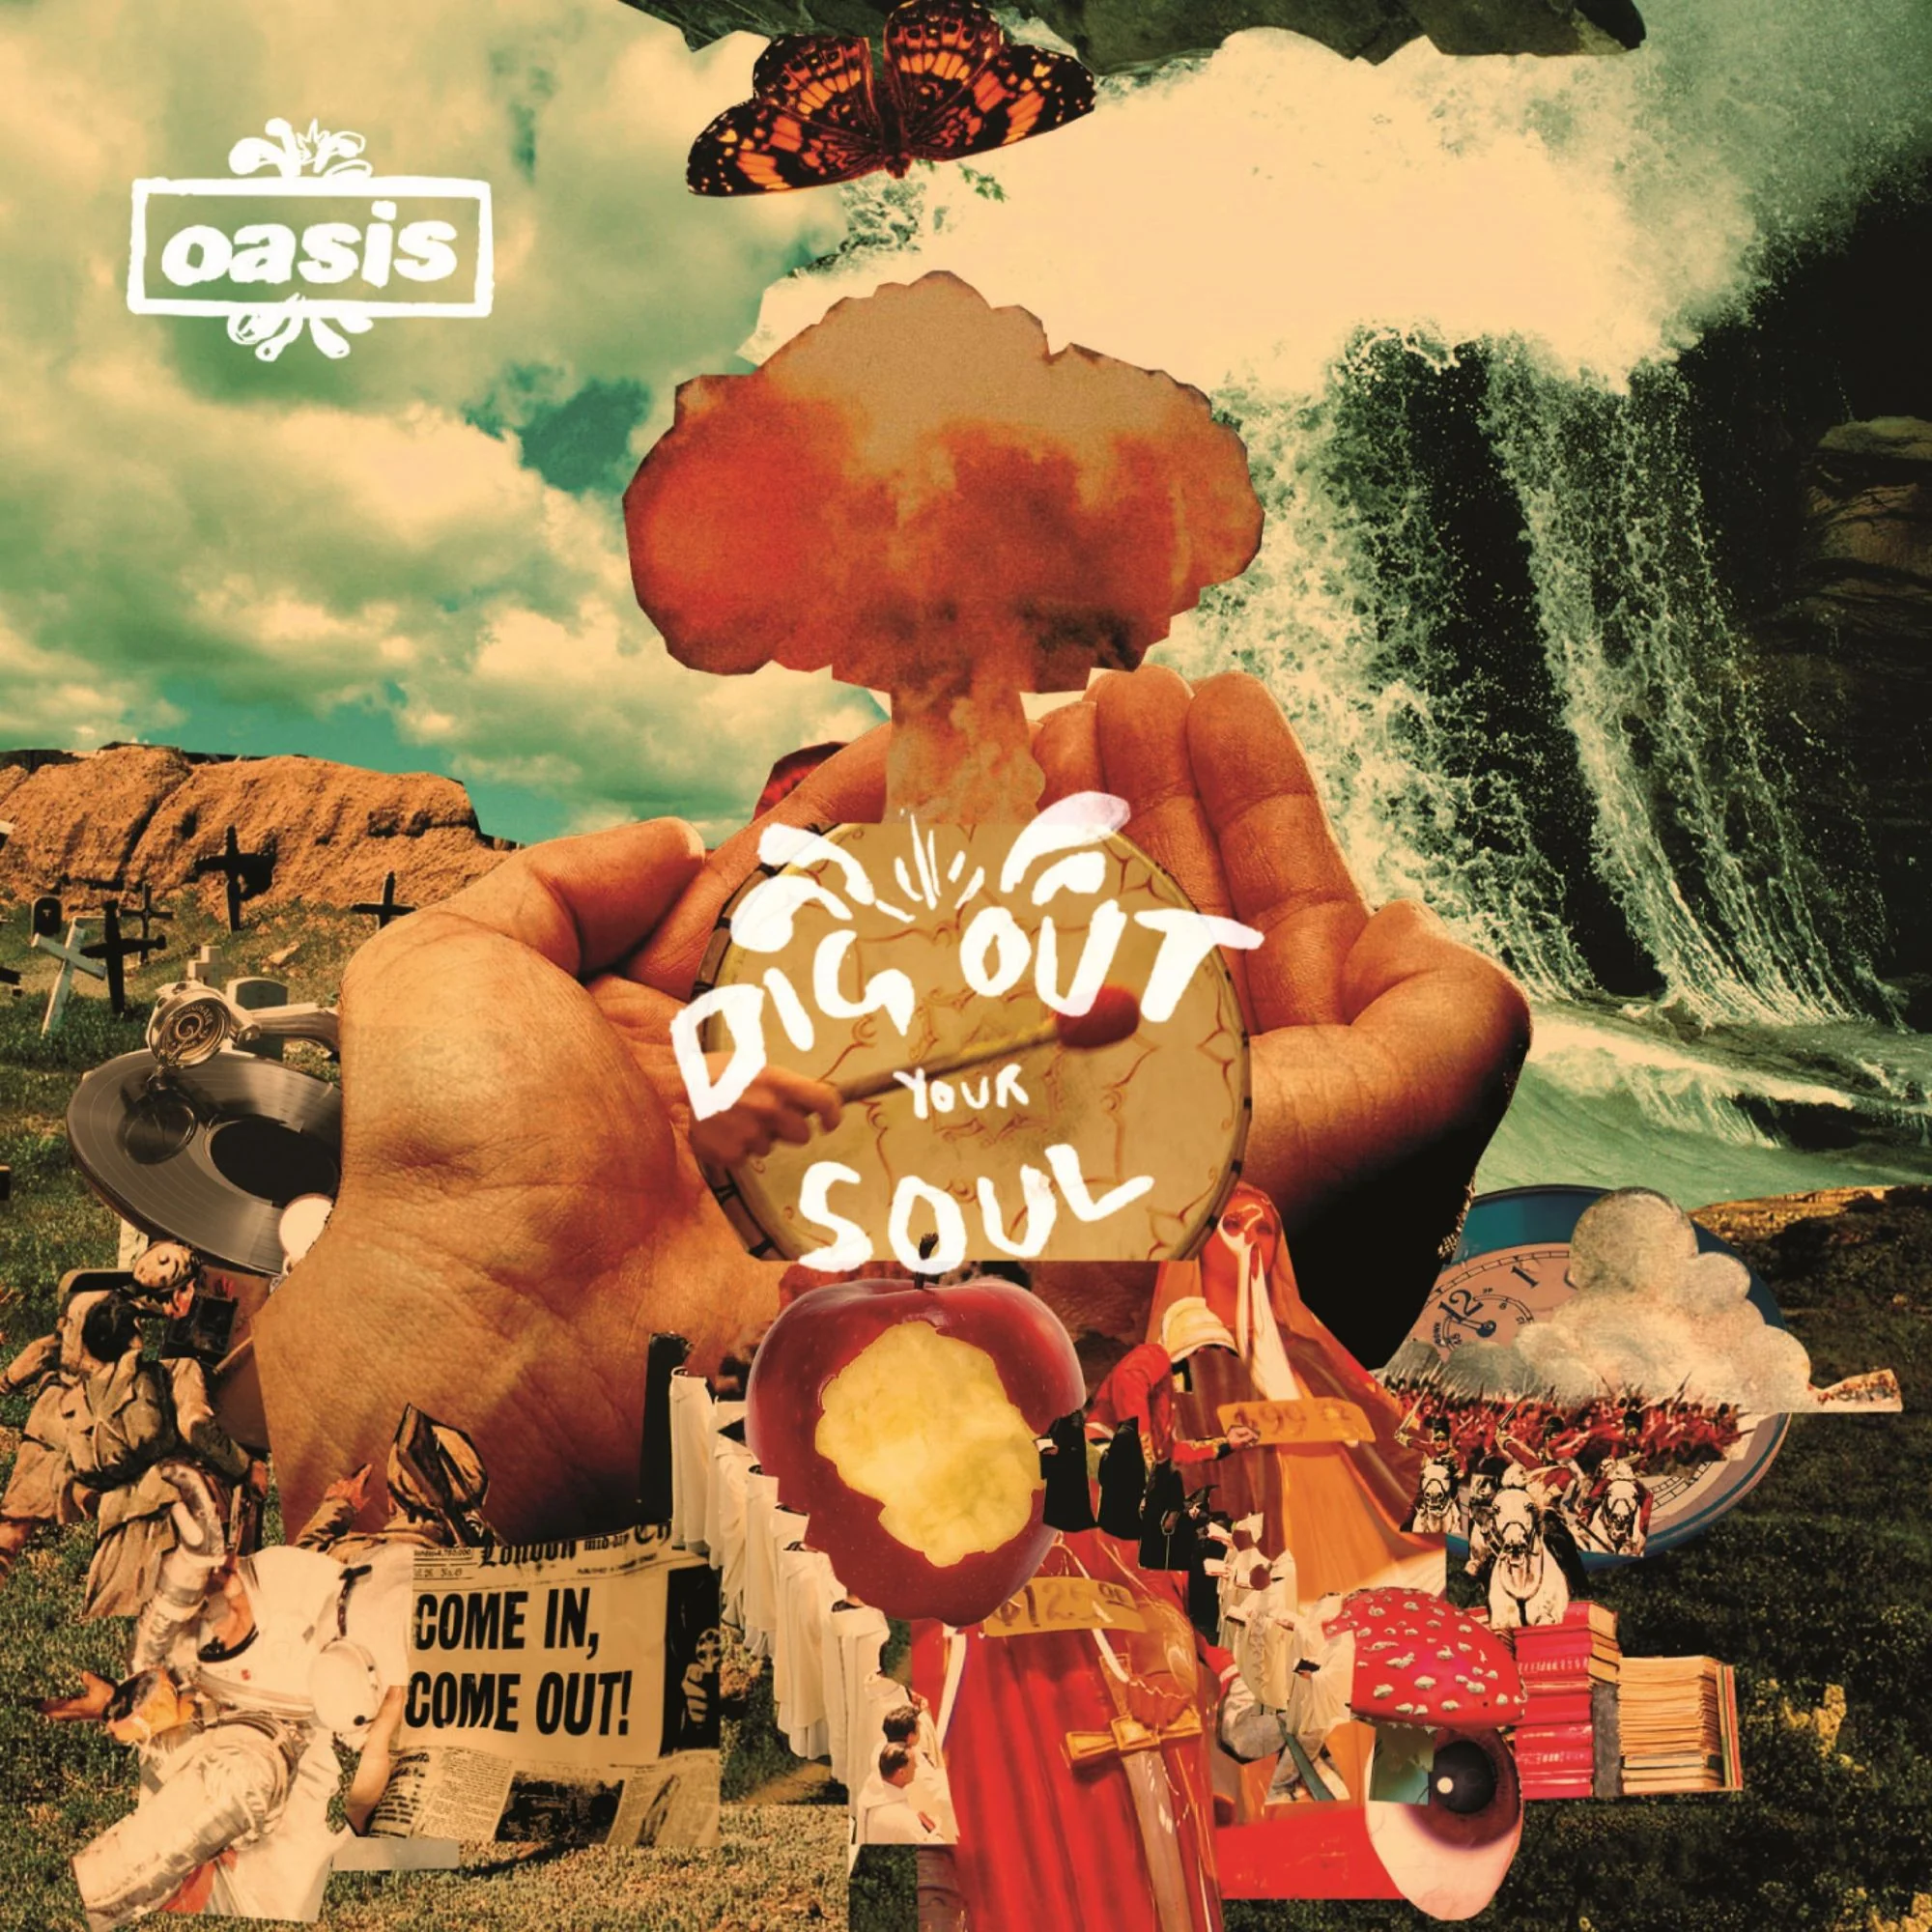 Dig Out Your Soul by Oasis